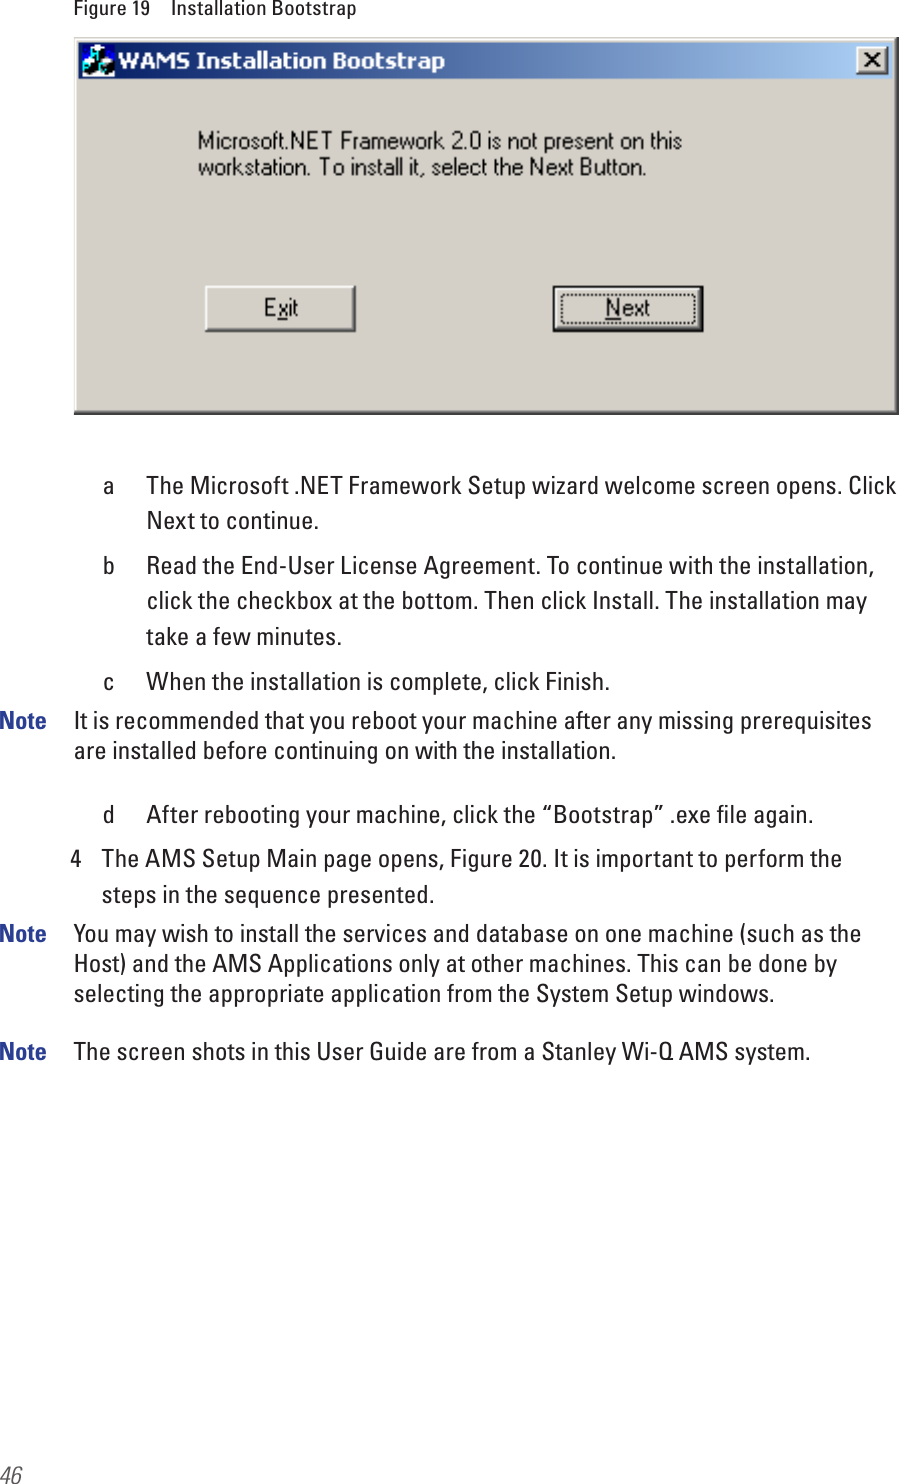 46Figure 19  Installation Bootstrapa  The Microsoft .NET Framework Setup wizard welcome screen opens. Click Next to continue.b  Read the End-User License Agreement. To continue with the installation, click the checkbox at the bottom. Then click Install. The installation may take a few minutes.c  When the installation is complete, click Finish.Note  It is recommended that you reboot your machine after any missing prerequisites are installed before continuing on with the installation.d  After rebooting your machine, click the “Bootstrap” .exe ﬁle again.4  The AMS Setup Main page opens, Figure 20. It is important to perform the steps in the sequence presented.Note  You may wish to install the services and database on one machine (such as the Host) and the AMS Applications only at other machines. This can be done by selecting the appropriate application from the System Setup windows.Note  The screen shots in this User Guide are from a Stanley Wi-Q AMS system. 